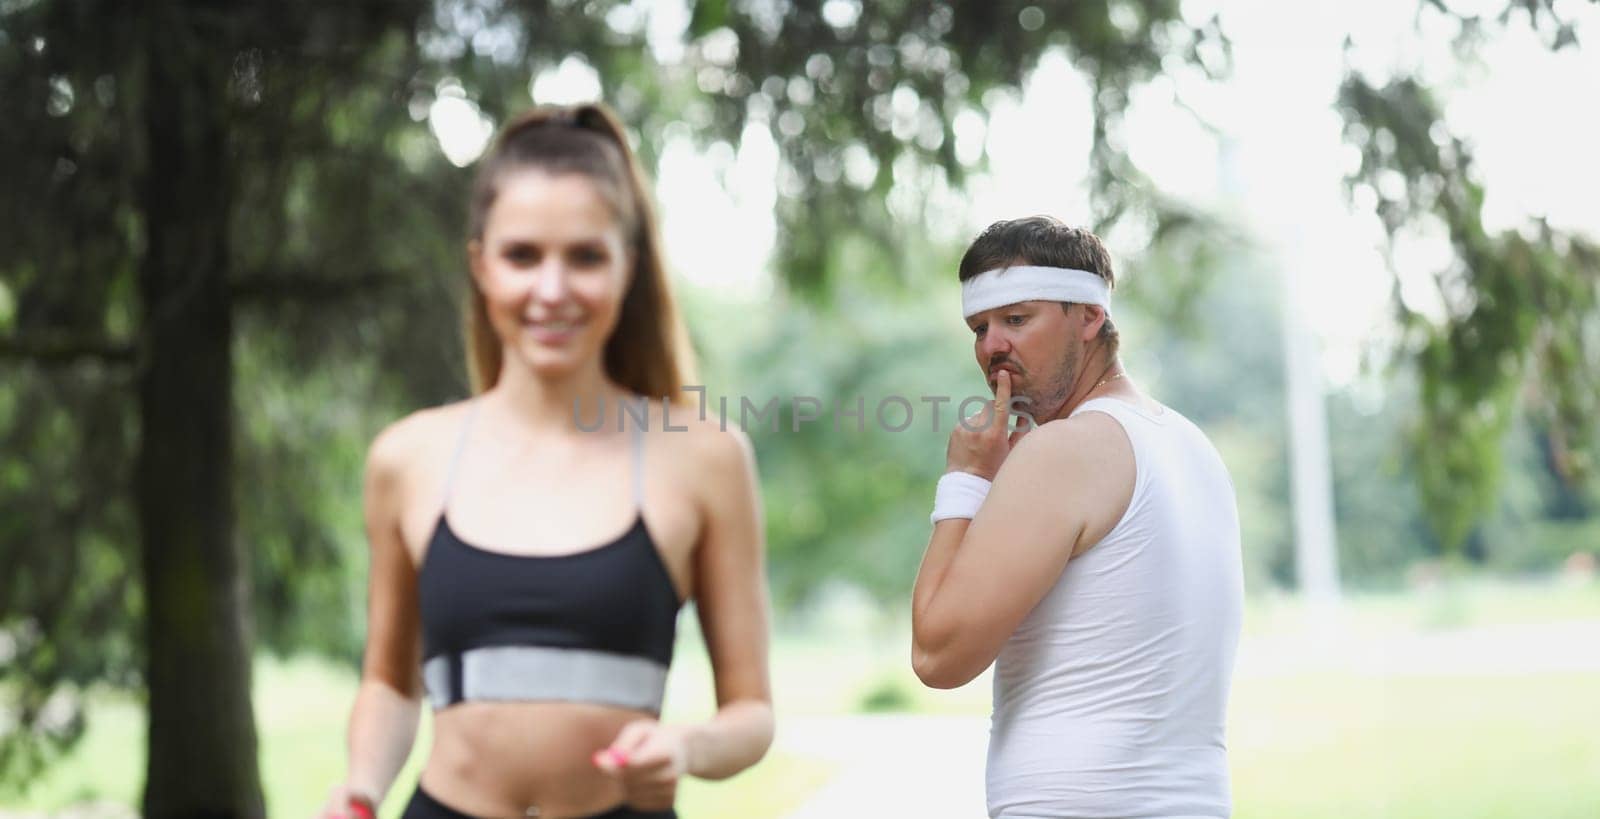 Portrait of middle aged man check on young beautiful fit woman running in park. Active woman jogging in front, feeling energetic. Sport, health concept